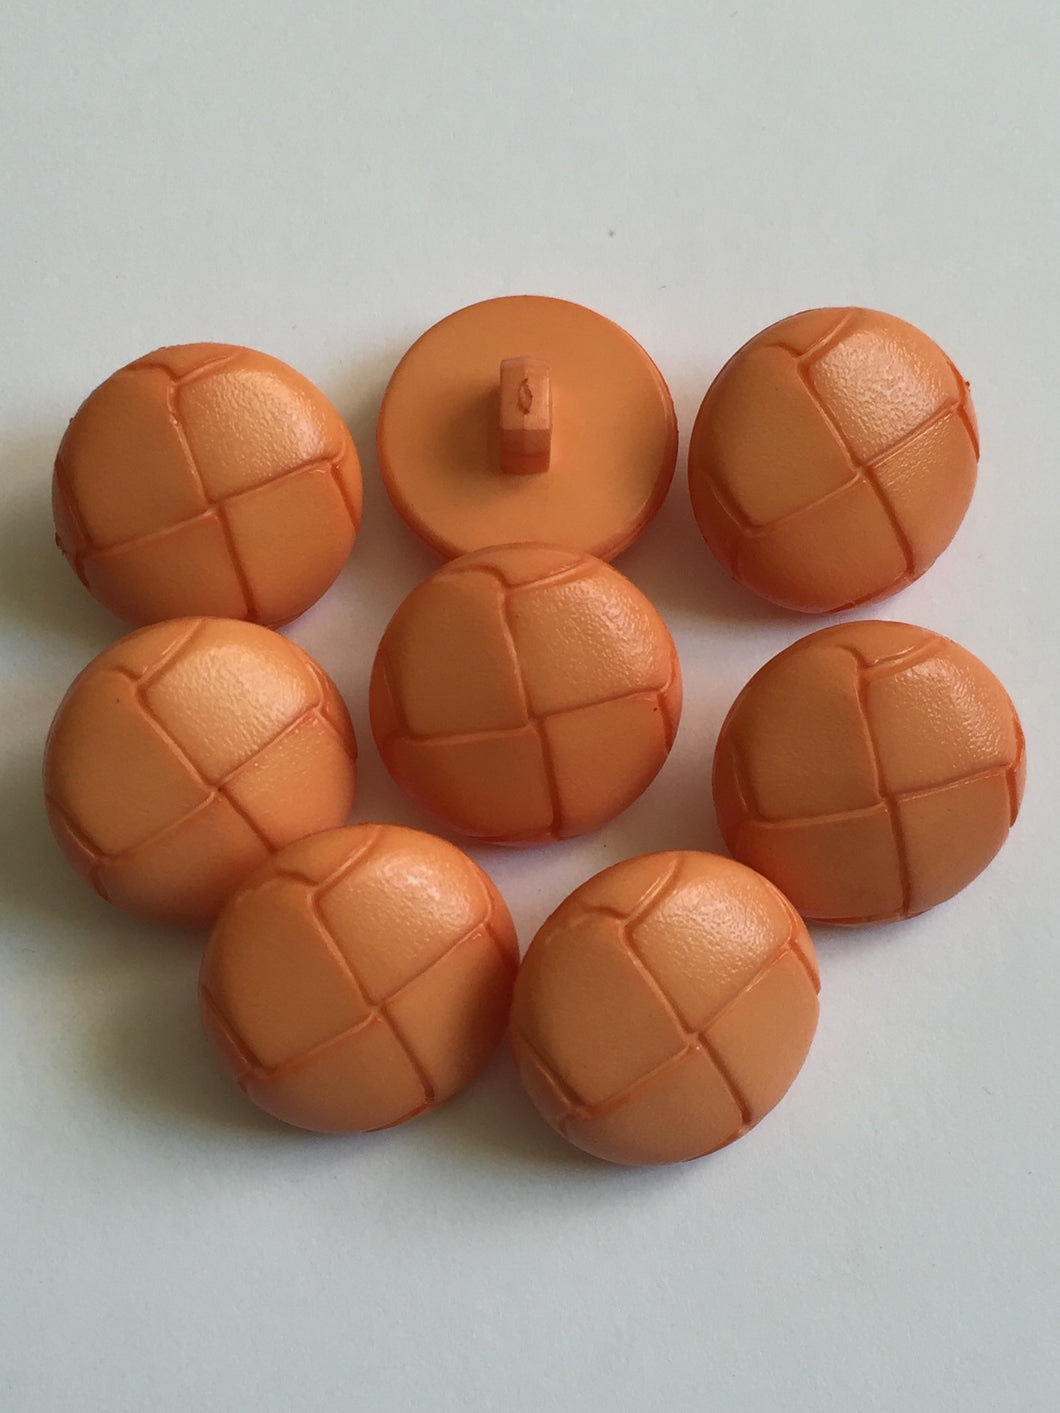 1 ORANGE LEATHER FOOTBALL Look Alike Shank Buttons 20mm Wide Dresses Tops Coats Babies Blazers Shirt Sewing Craft